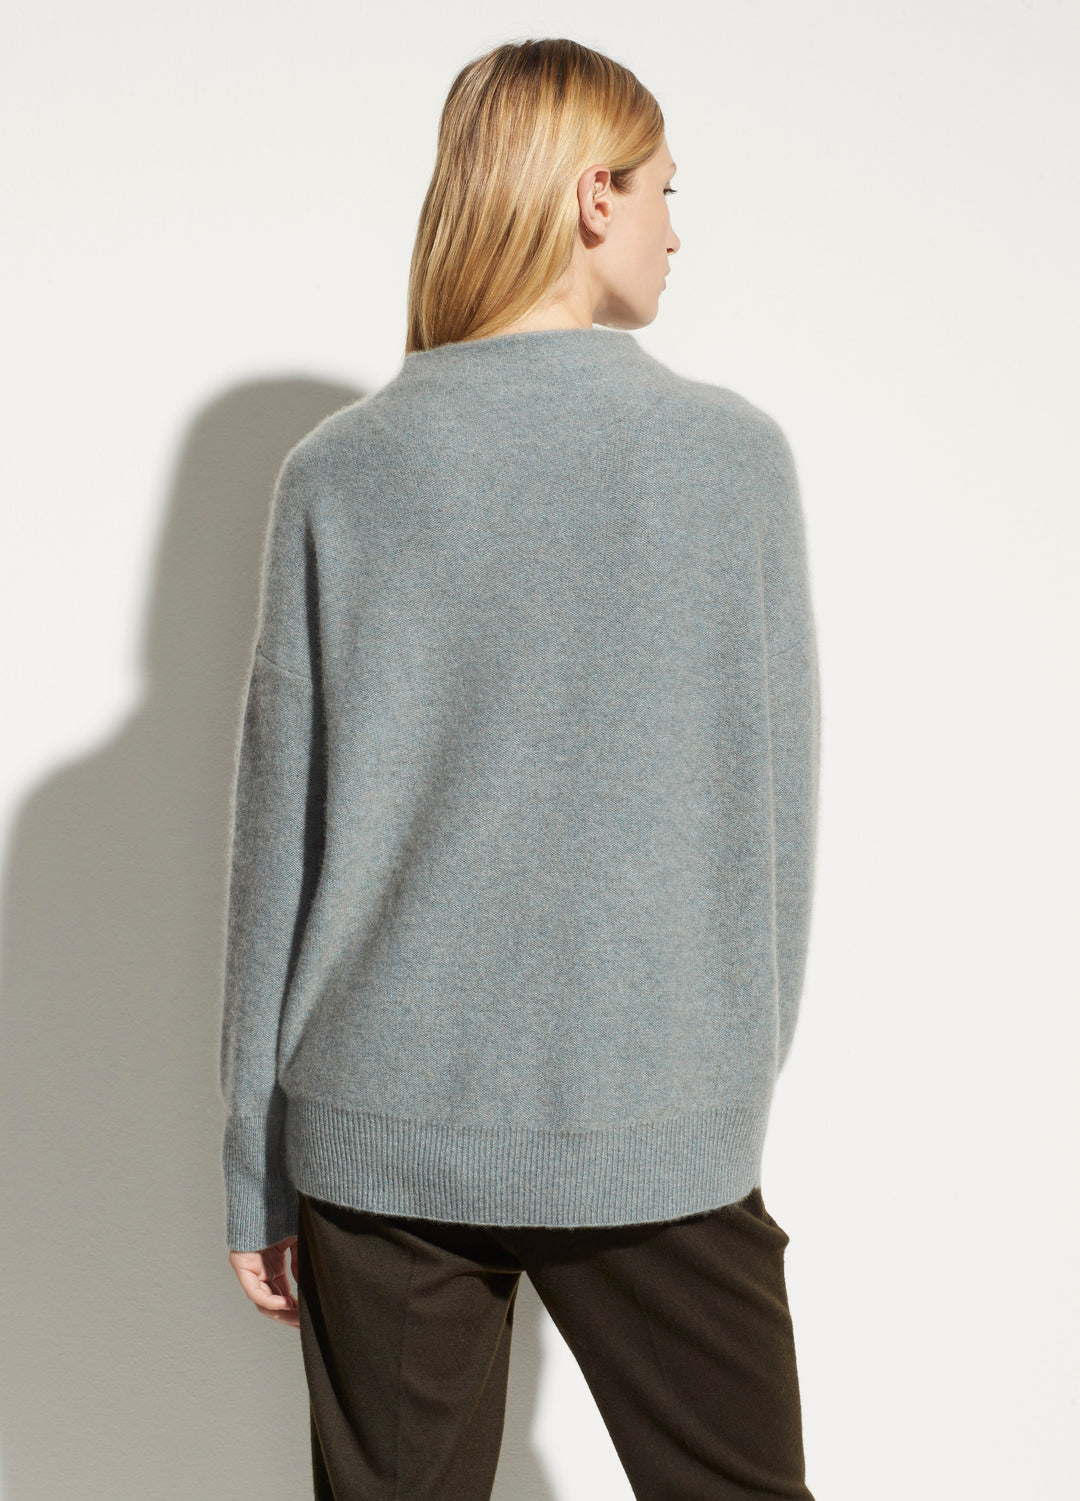 Vince - Boiled Cashmere Funnel Neck Pullover in Heather Patina